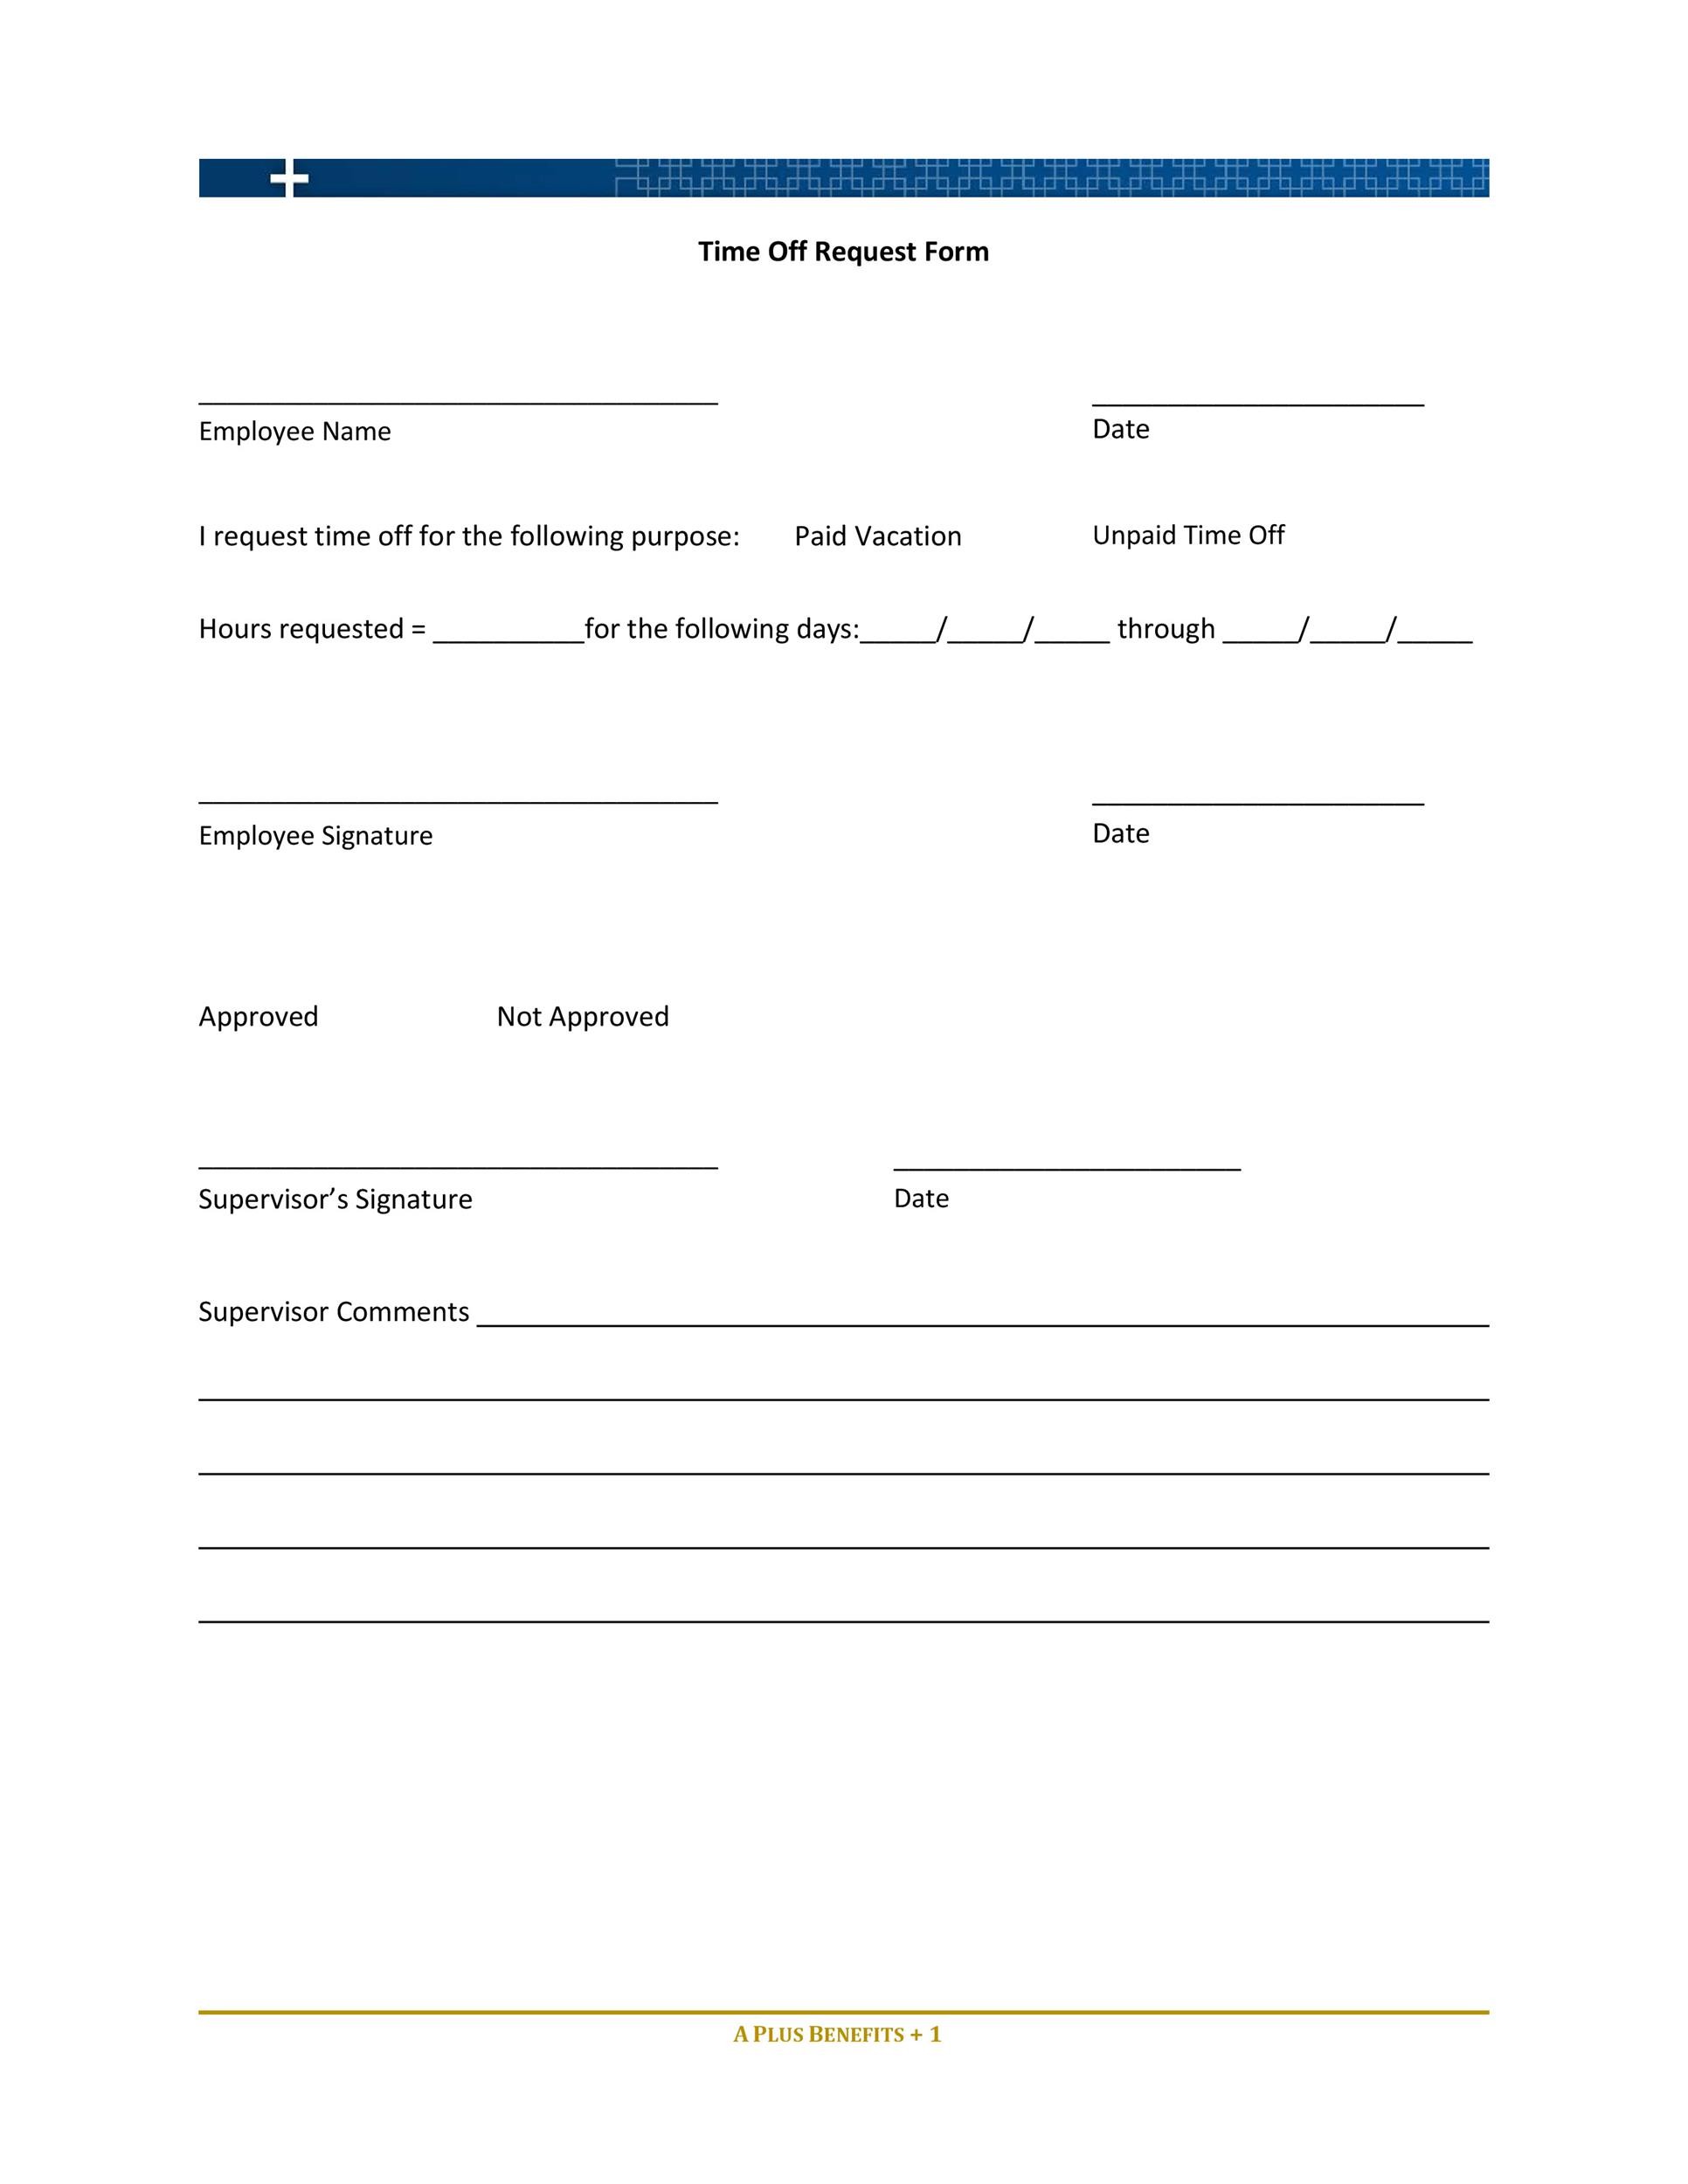 Free time off request form template 36